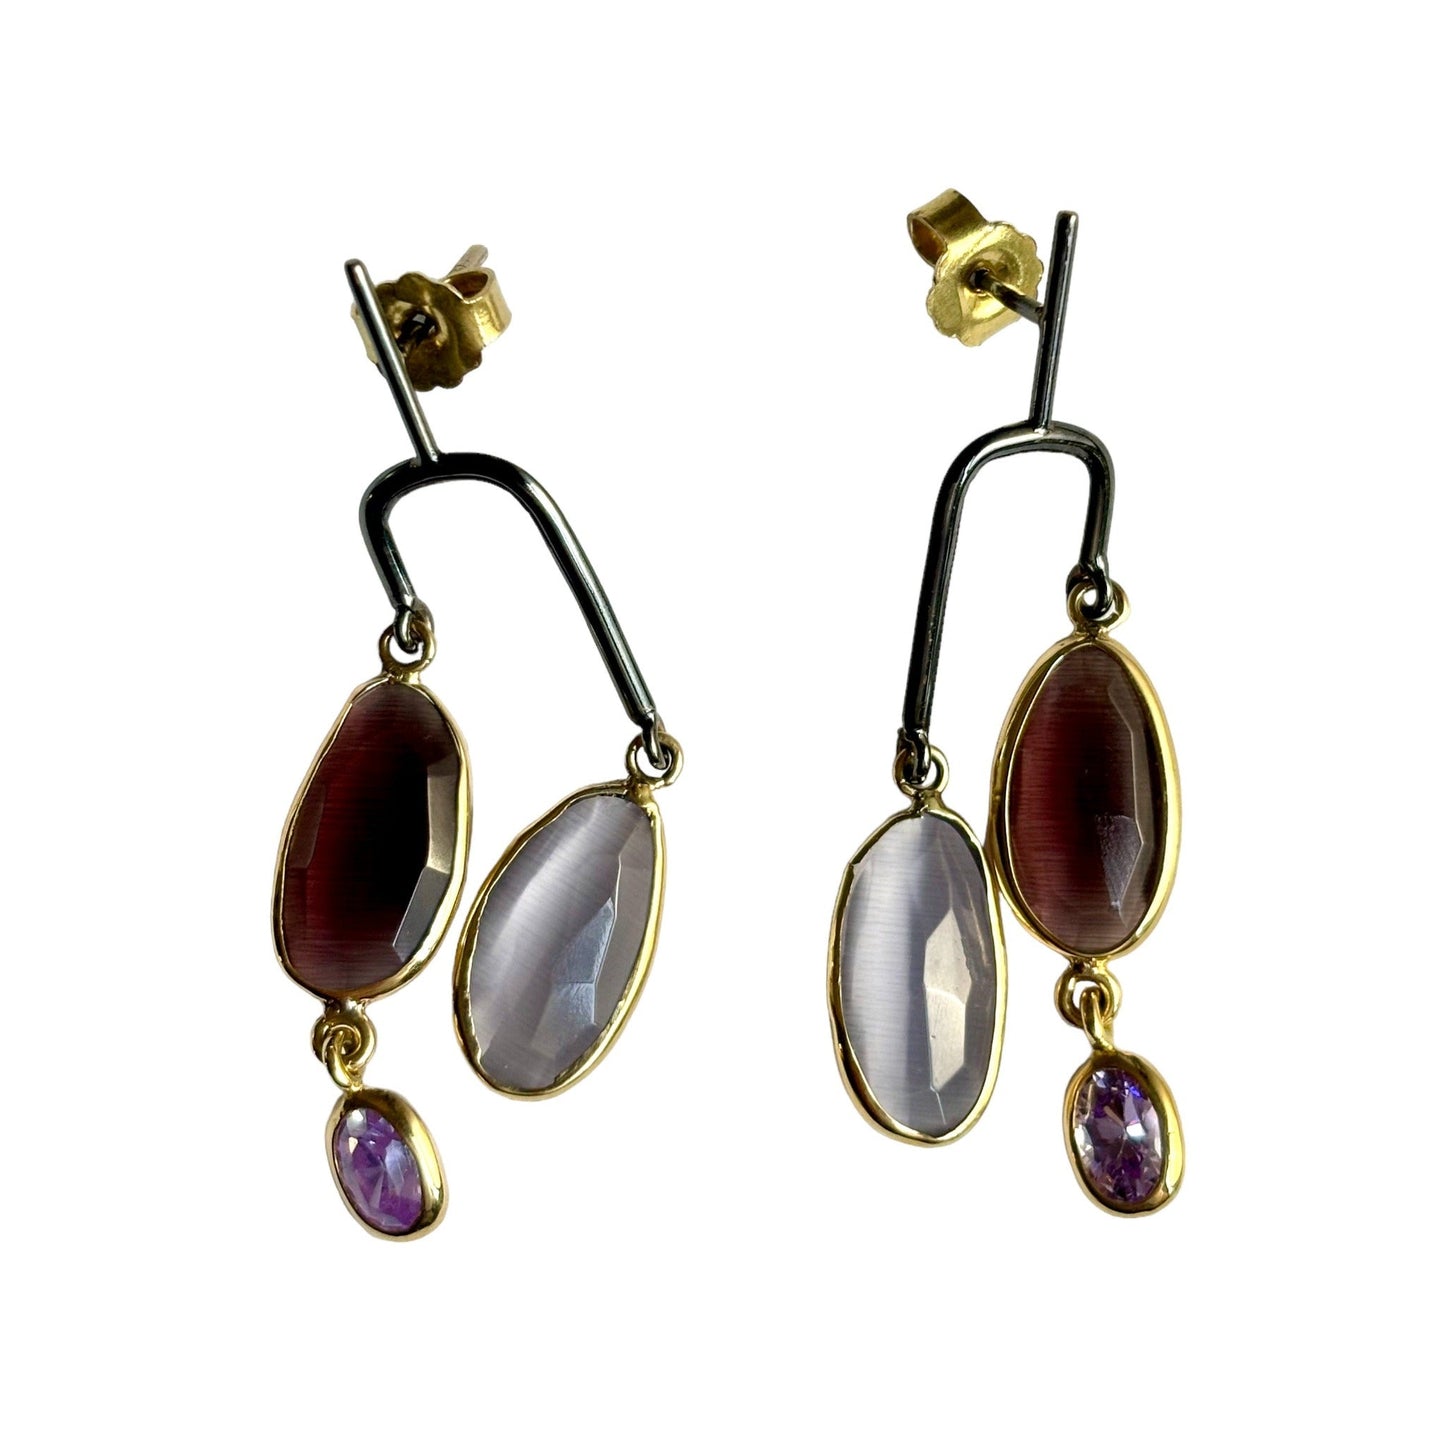 Amethysts Dangle Black Solid Gold Earrings. 4 Amethysts,  2 dark and 2 clear.